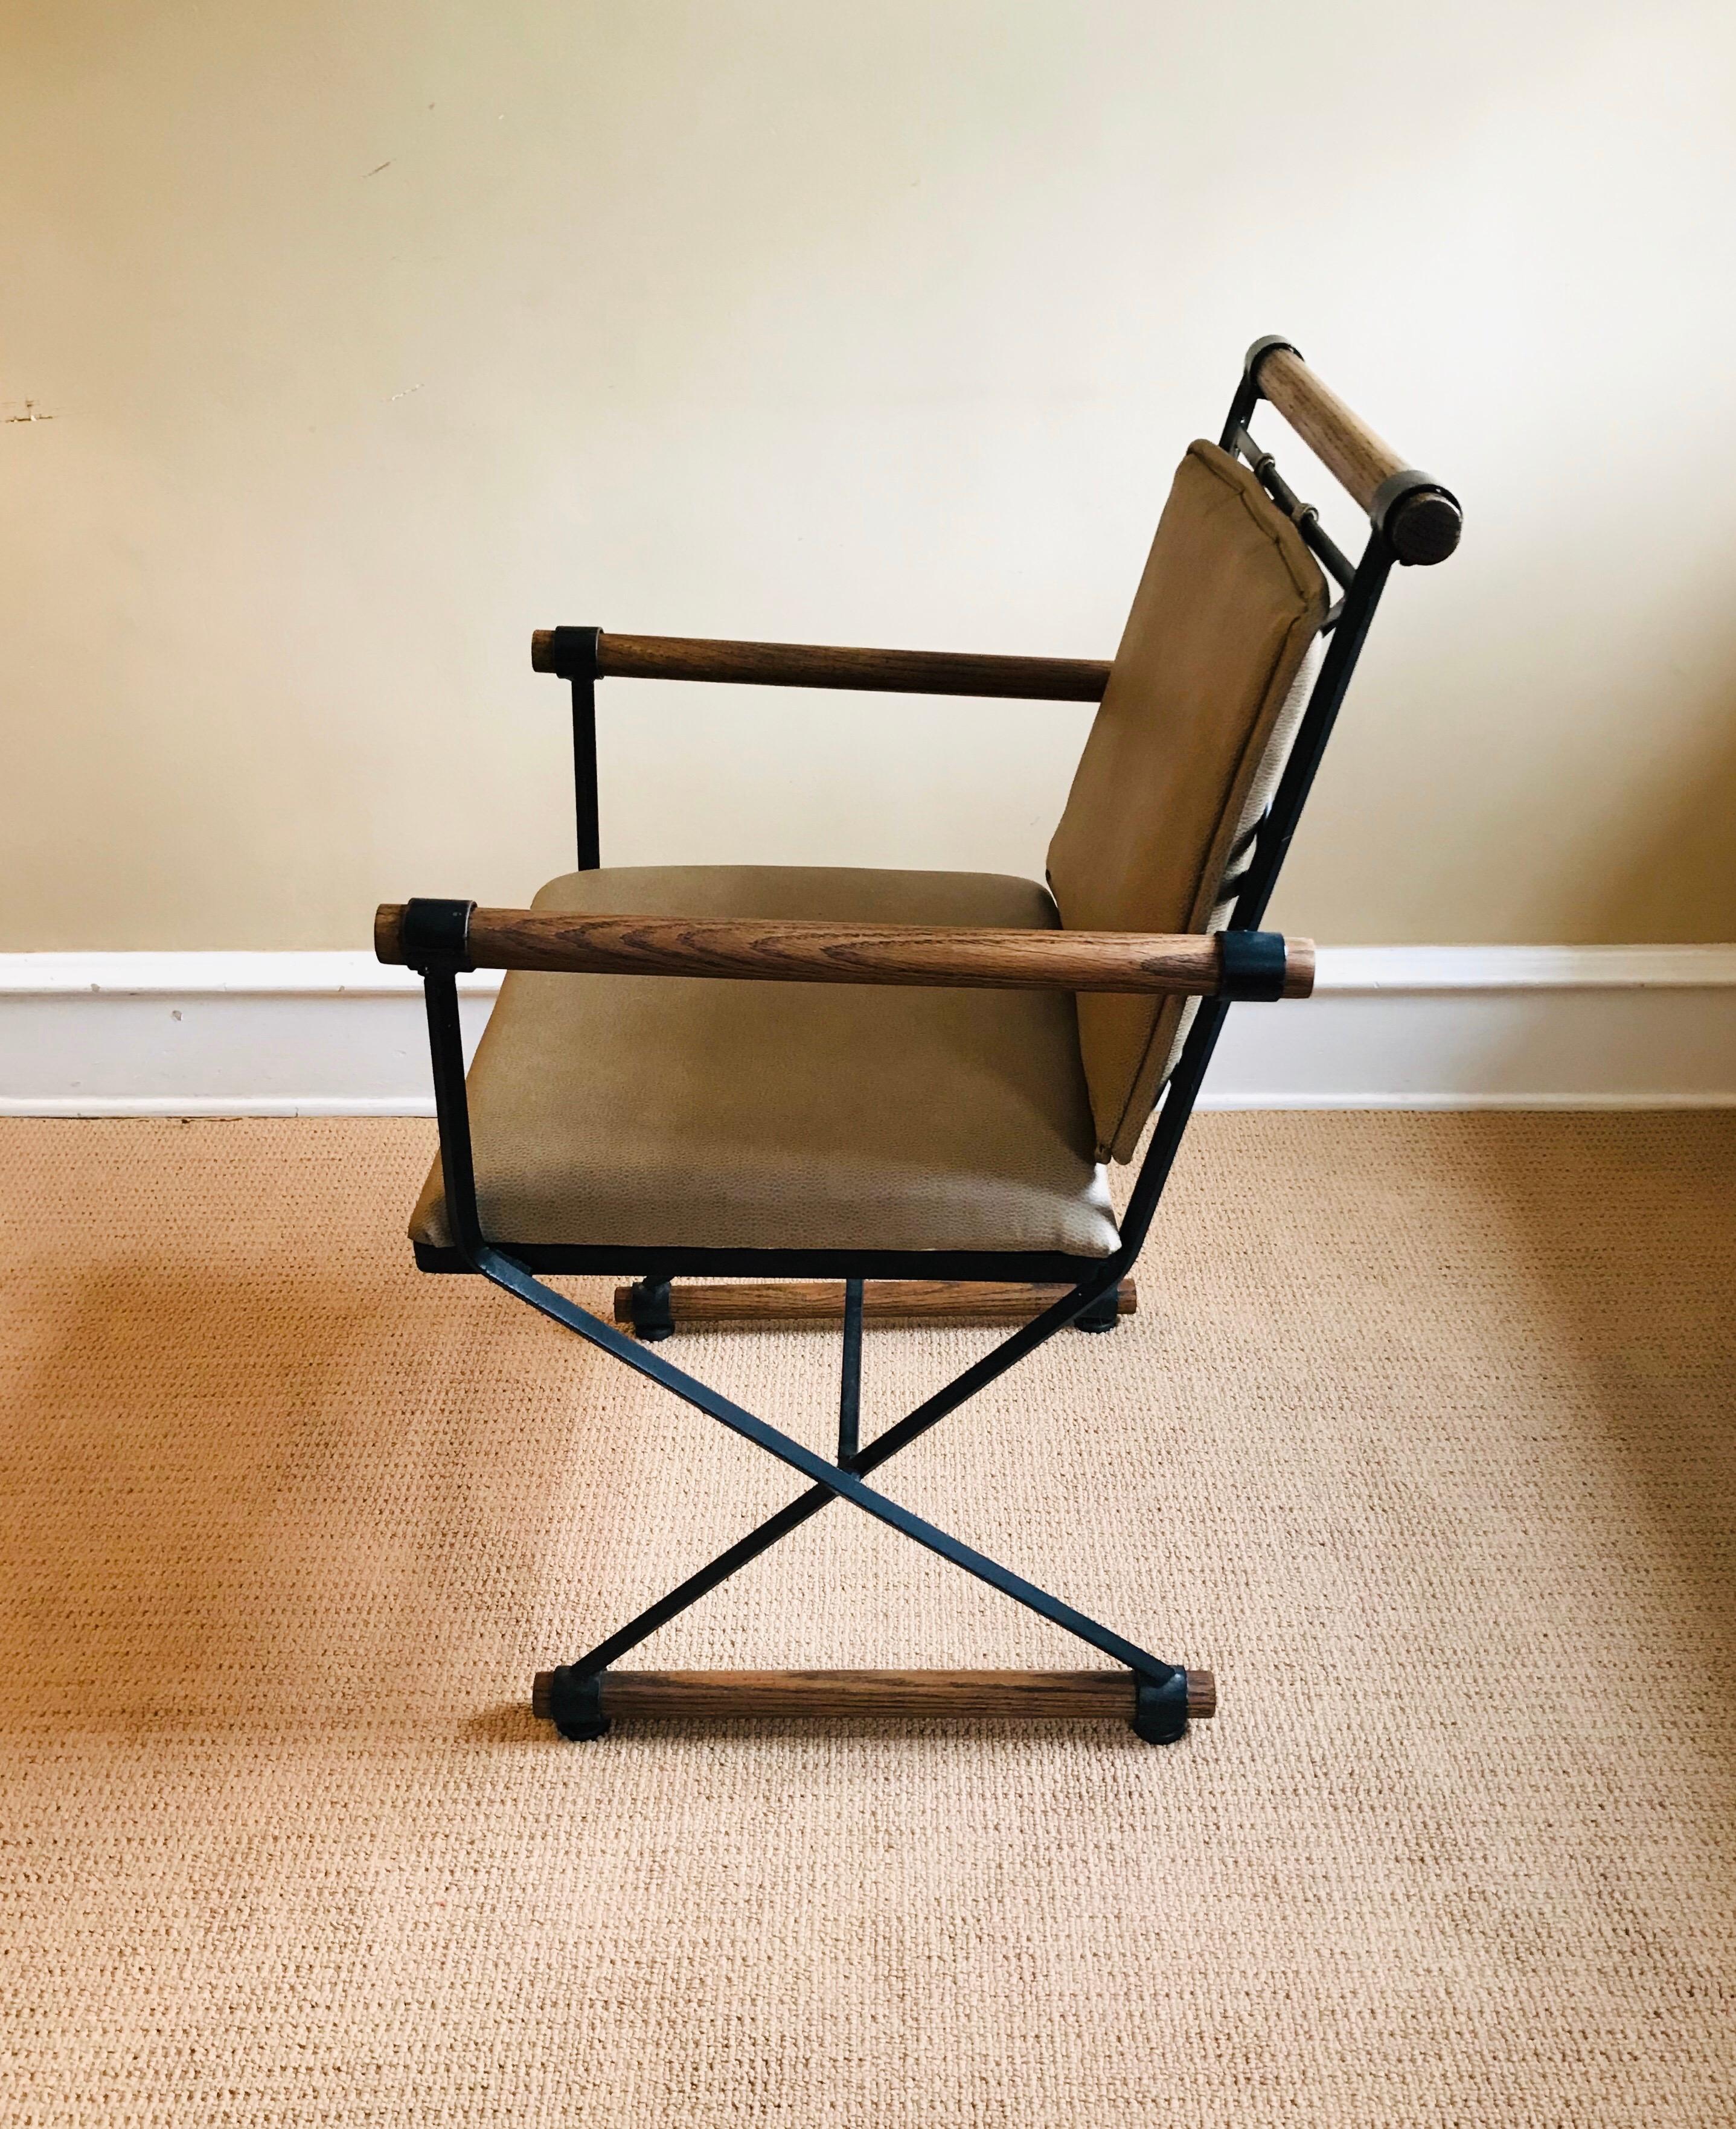 Handsome iron and oak directors chair. Upholstery is in a textured taupe material. Chair is substantial and is in beautiful condition.